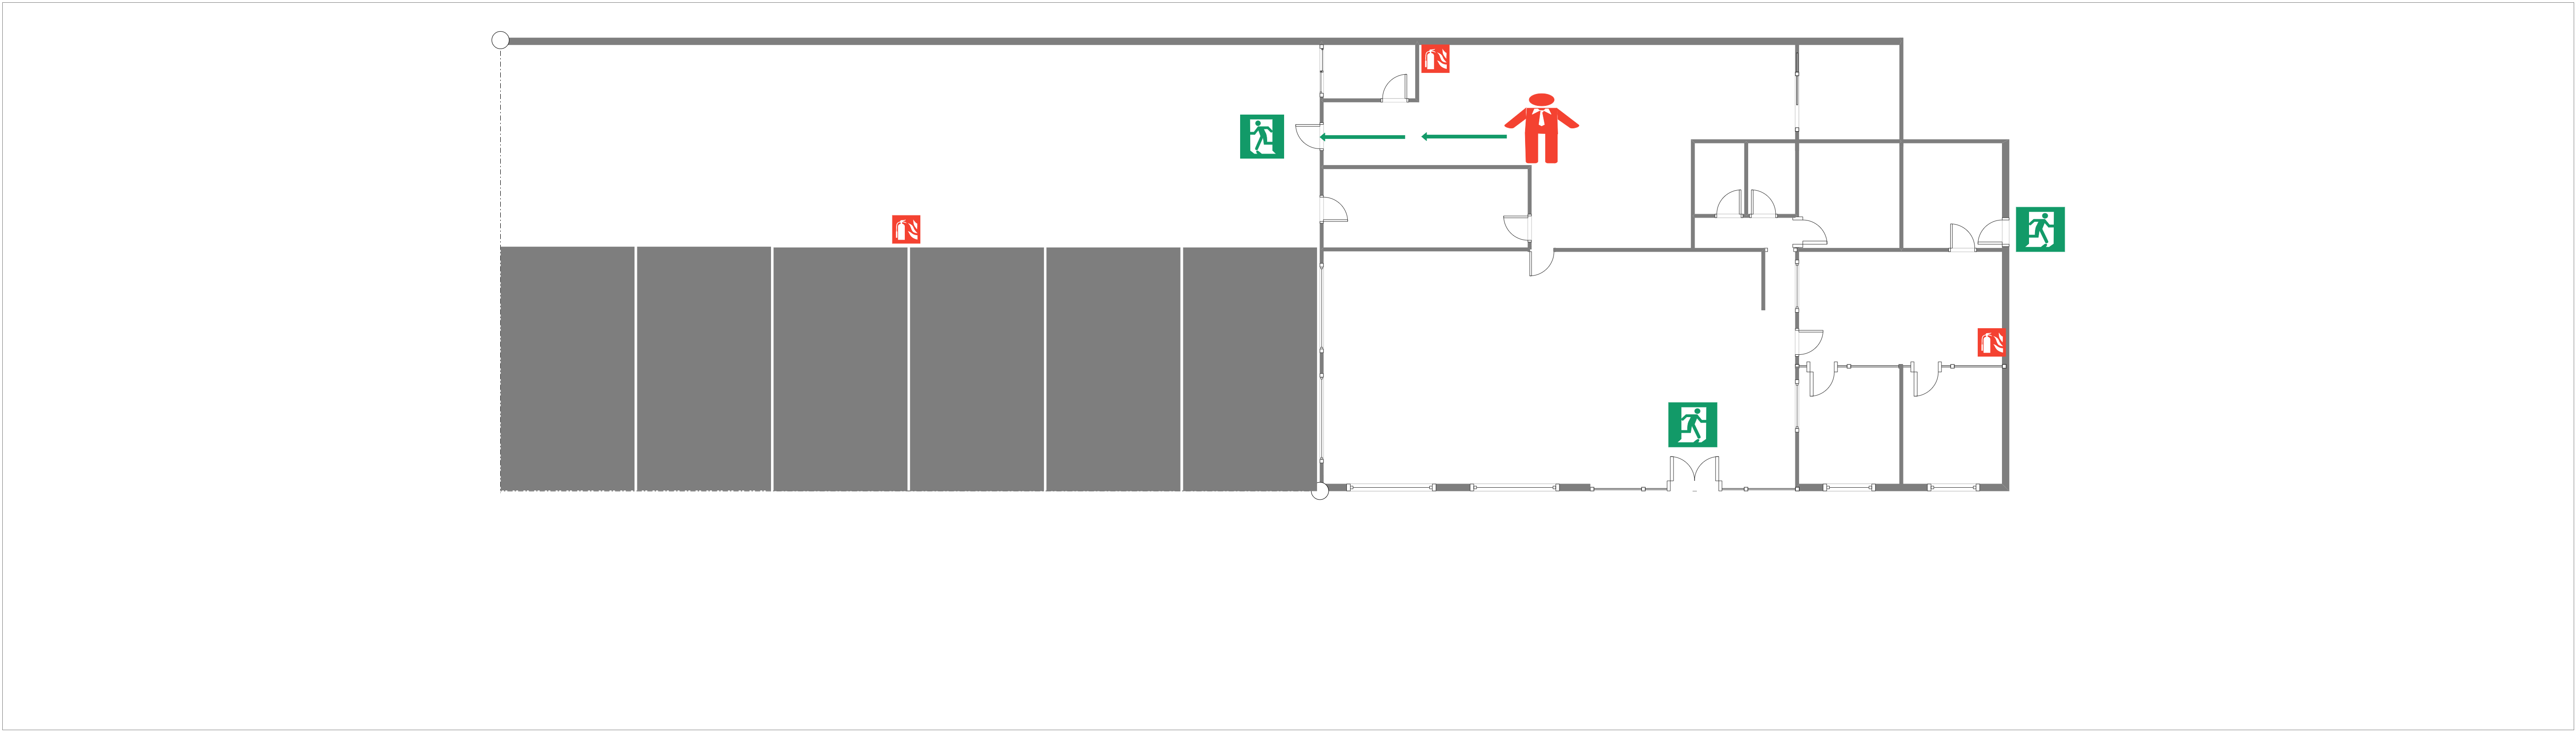 The image above is the Emergency Evacuation of Store Layout . The urgent immediate egress or escape of people from a location containing an imminent threat, an ongoing threat, or a harm to lives or property is known as an emergency evacuation. A small-sca